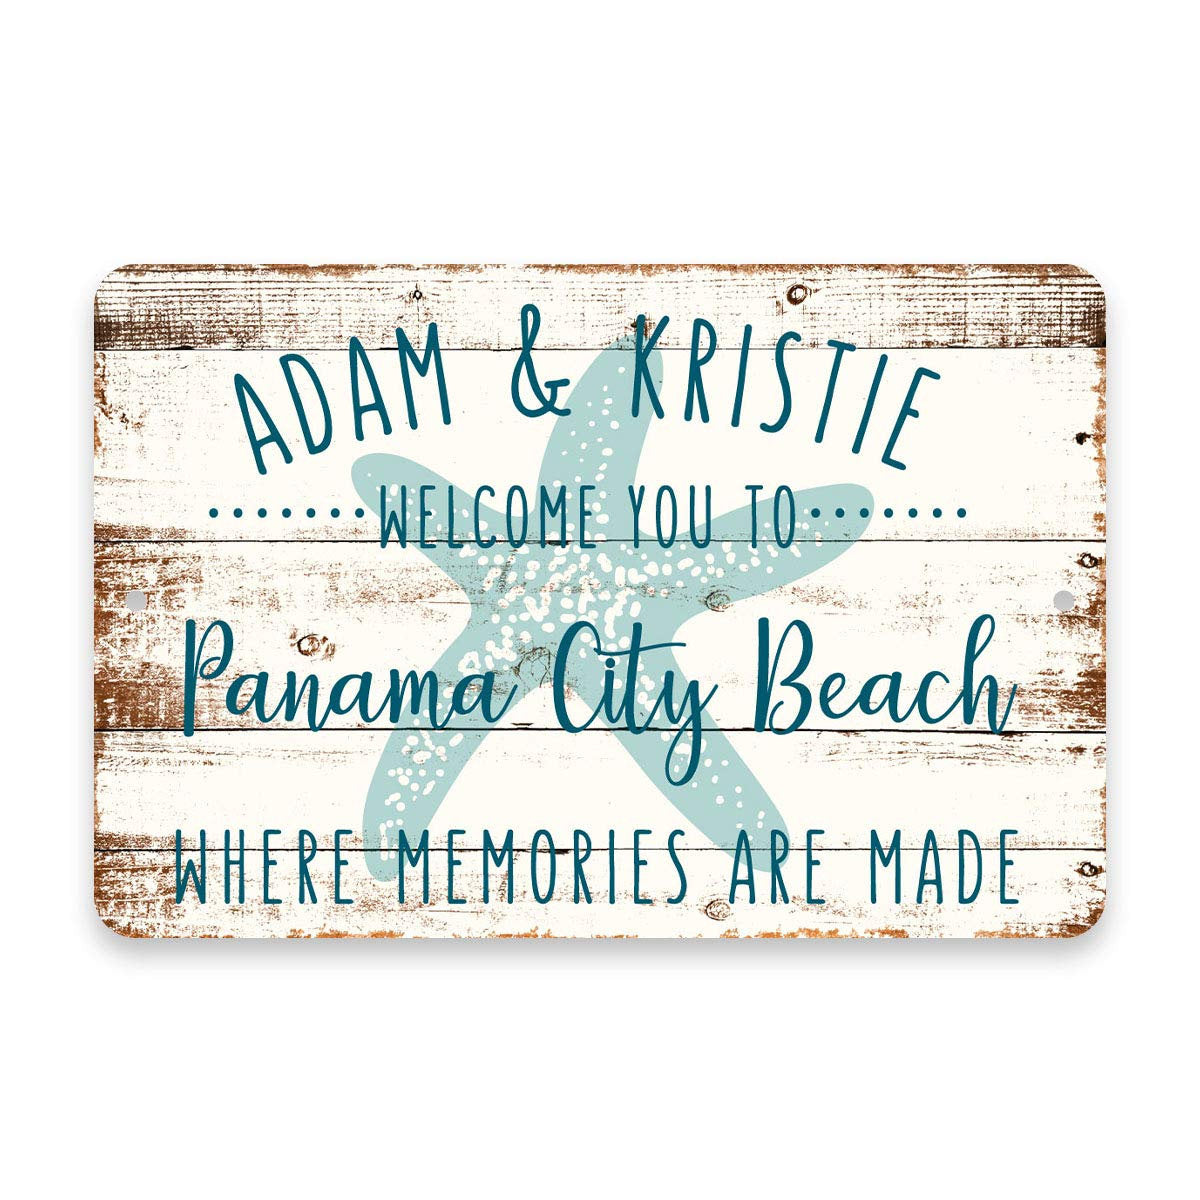 Personalized Welcome to Panama City Beach Where Memories are Made Sign - 8 X 12 Metal Sign with Wood Look